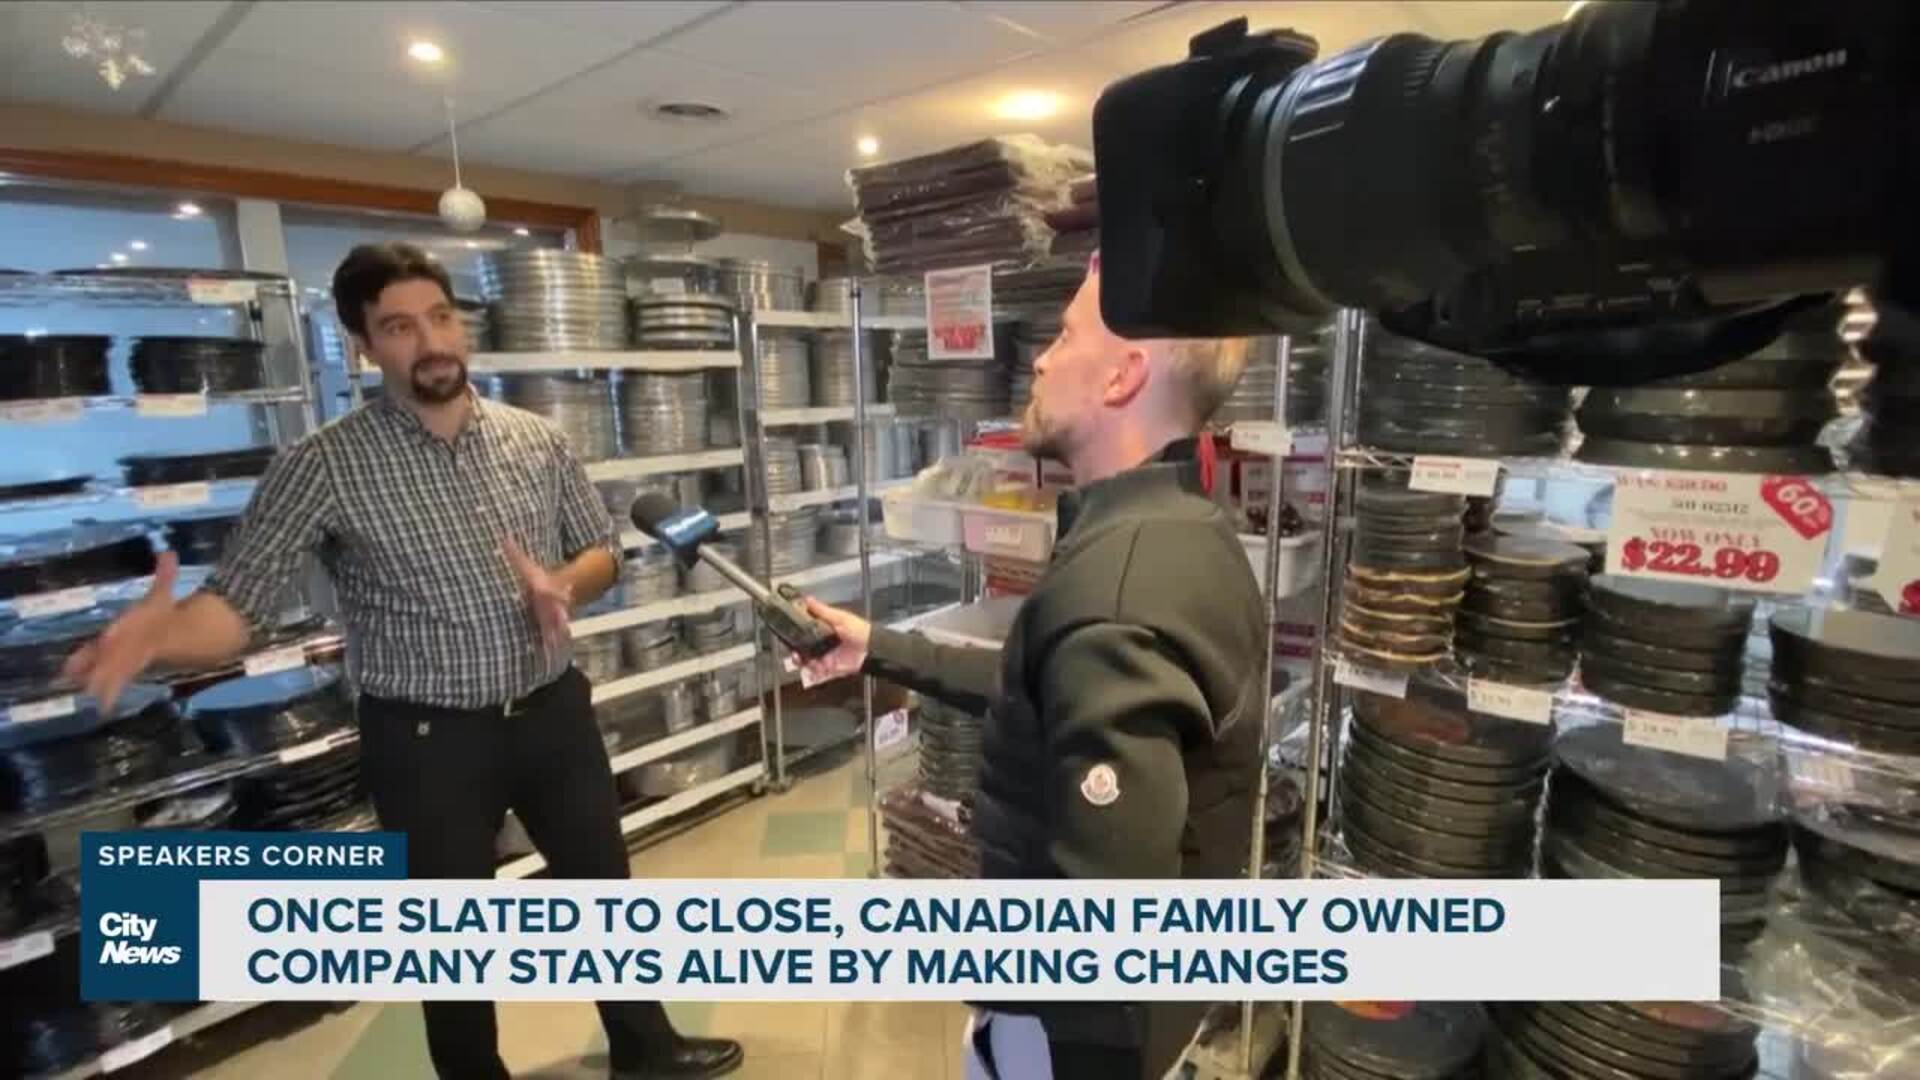 Changing to Survive: One Canadian company's story